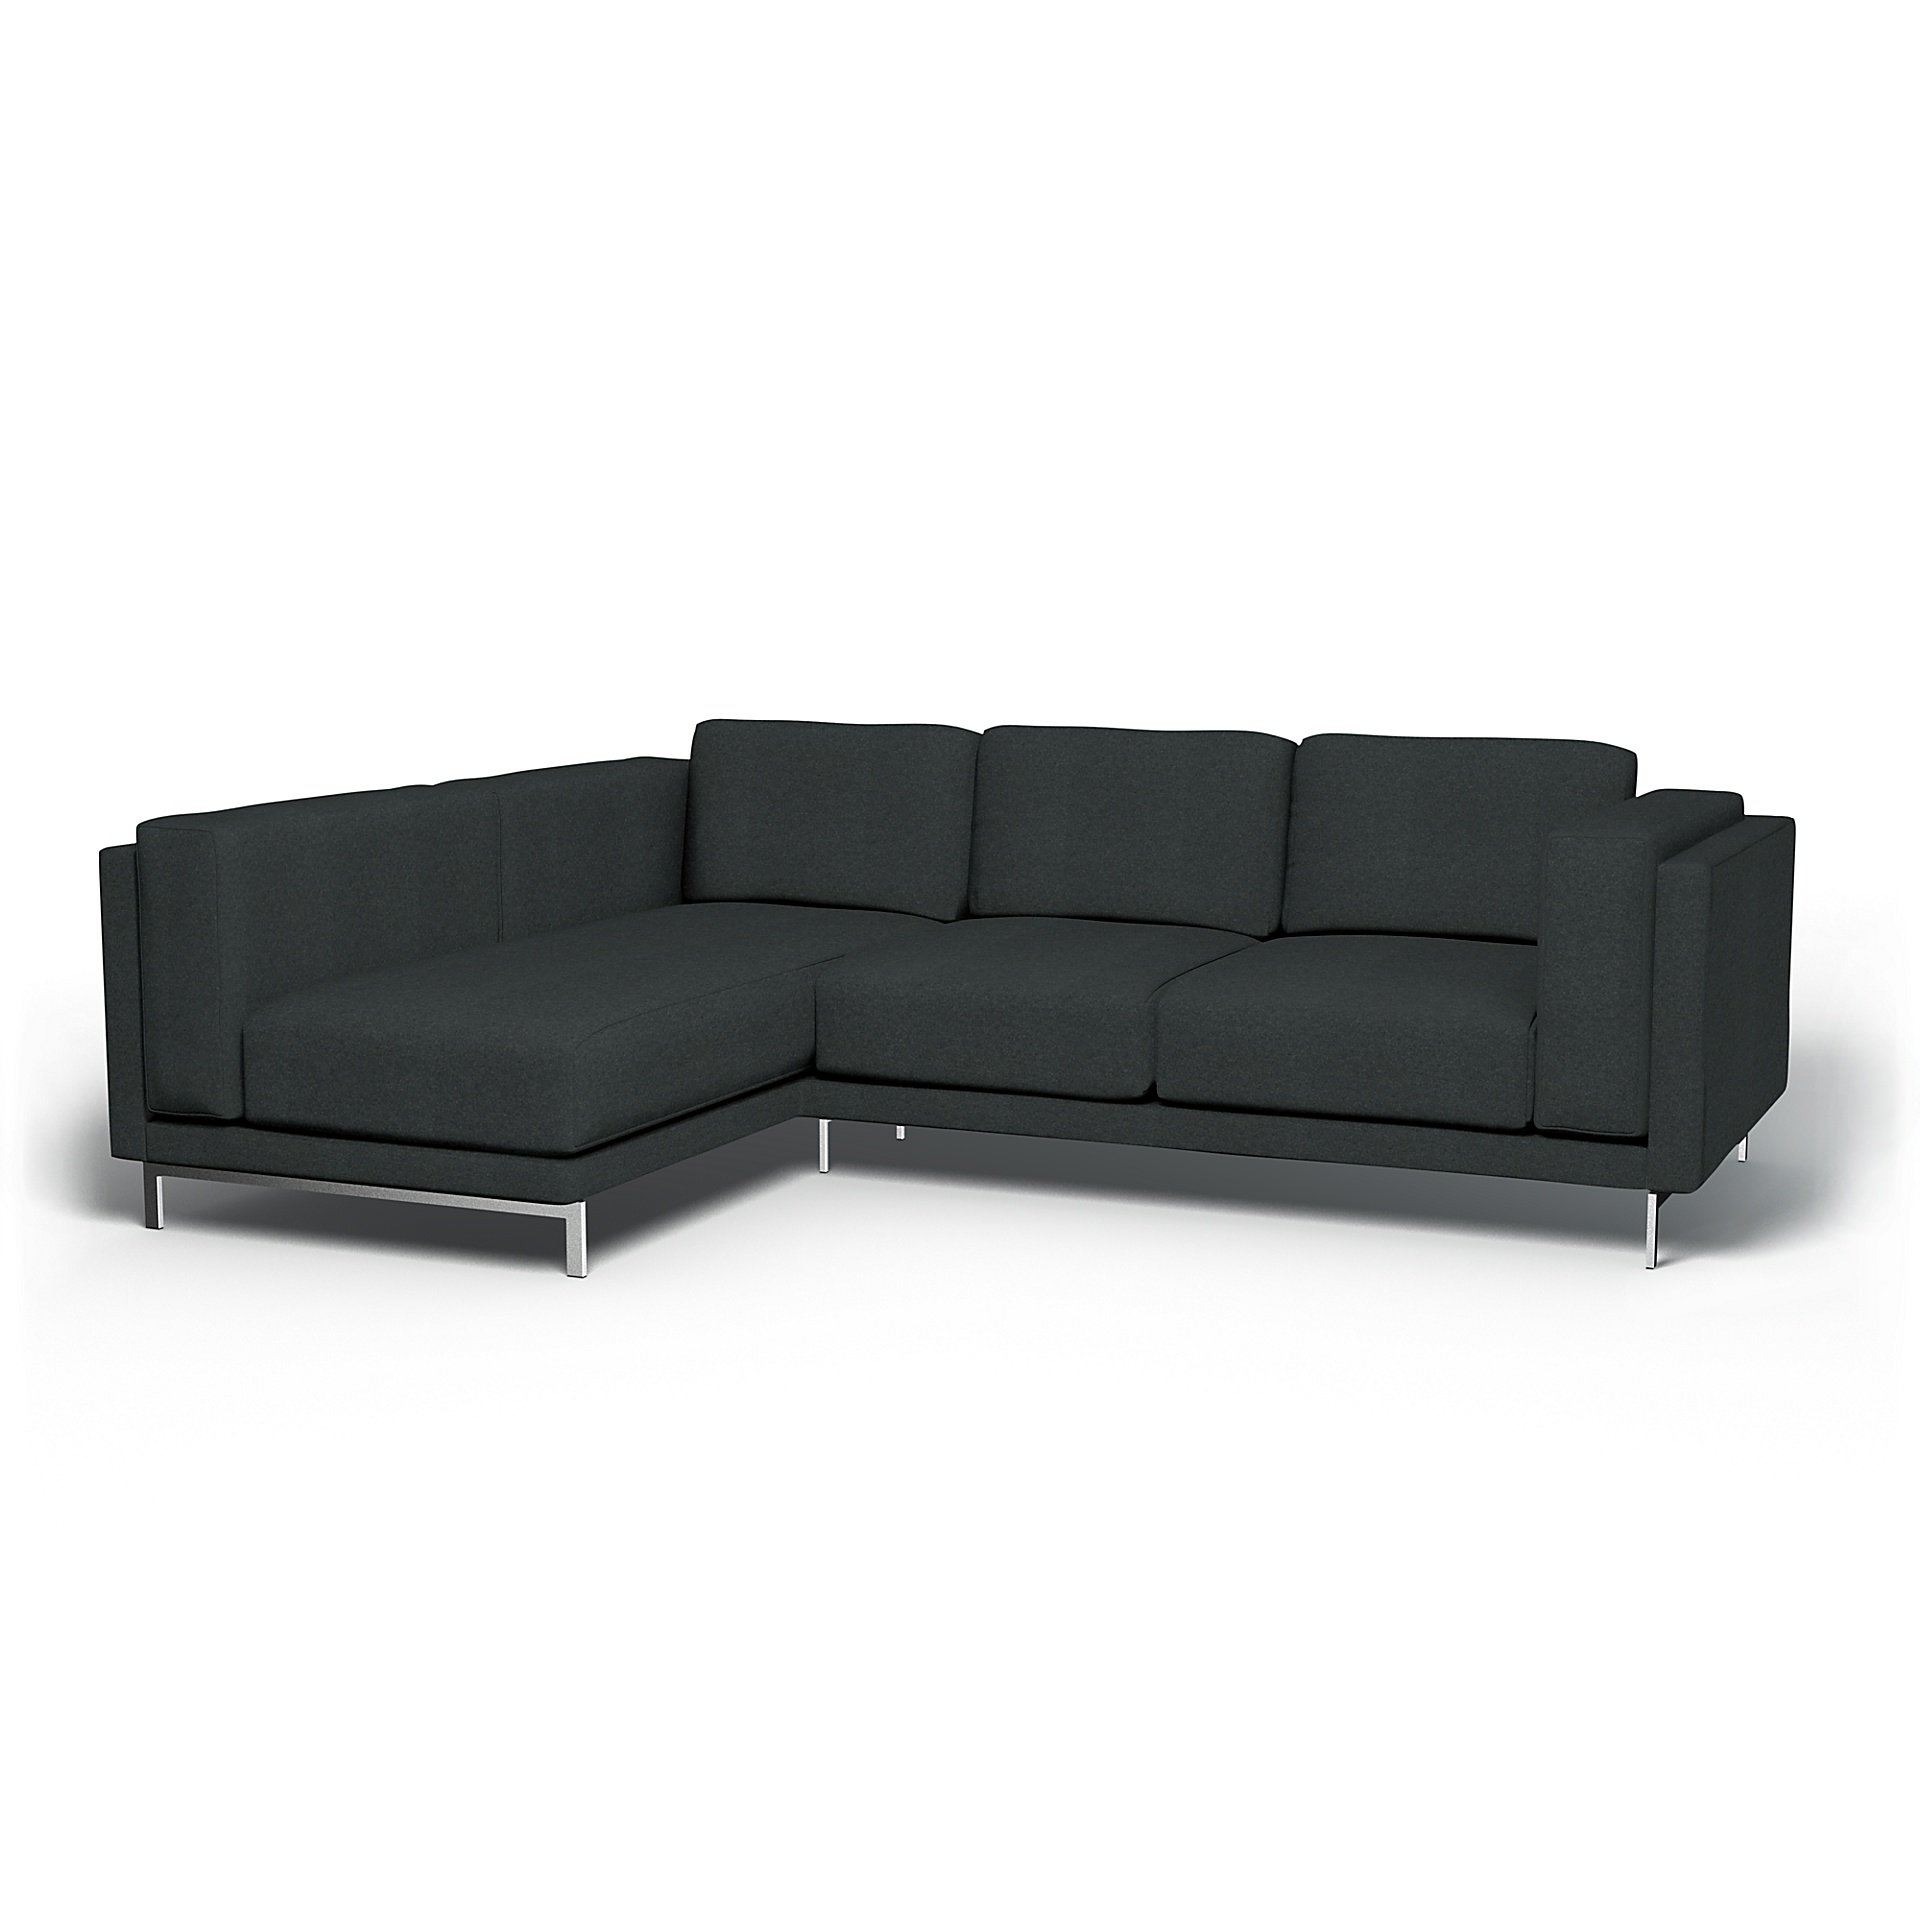 IKEA - Nockeby 3 Seater Sofa with Left Chaise Cover, Stone, Wool - Bemz